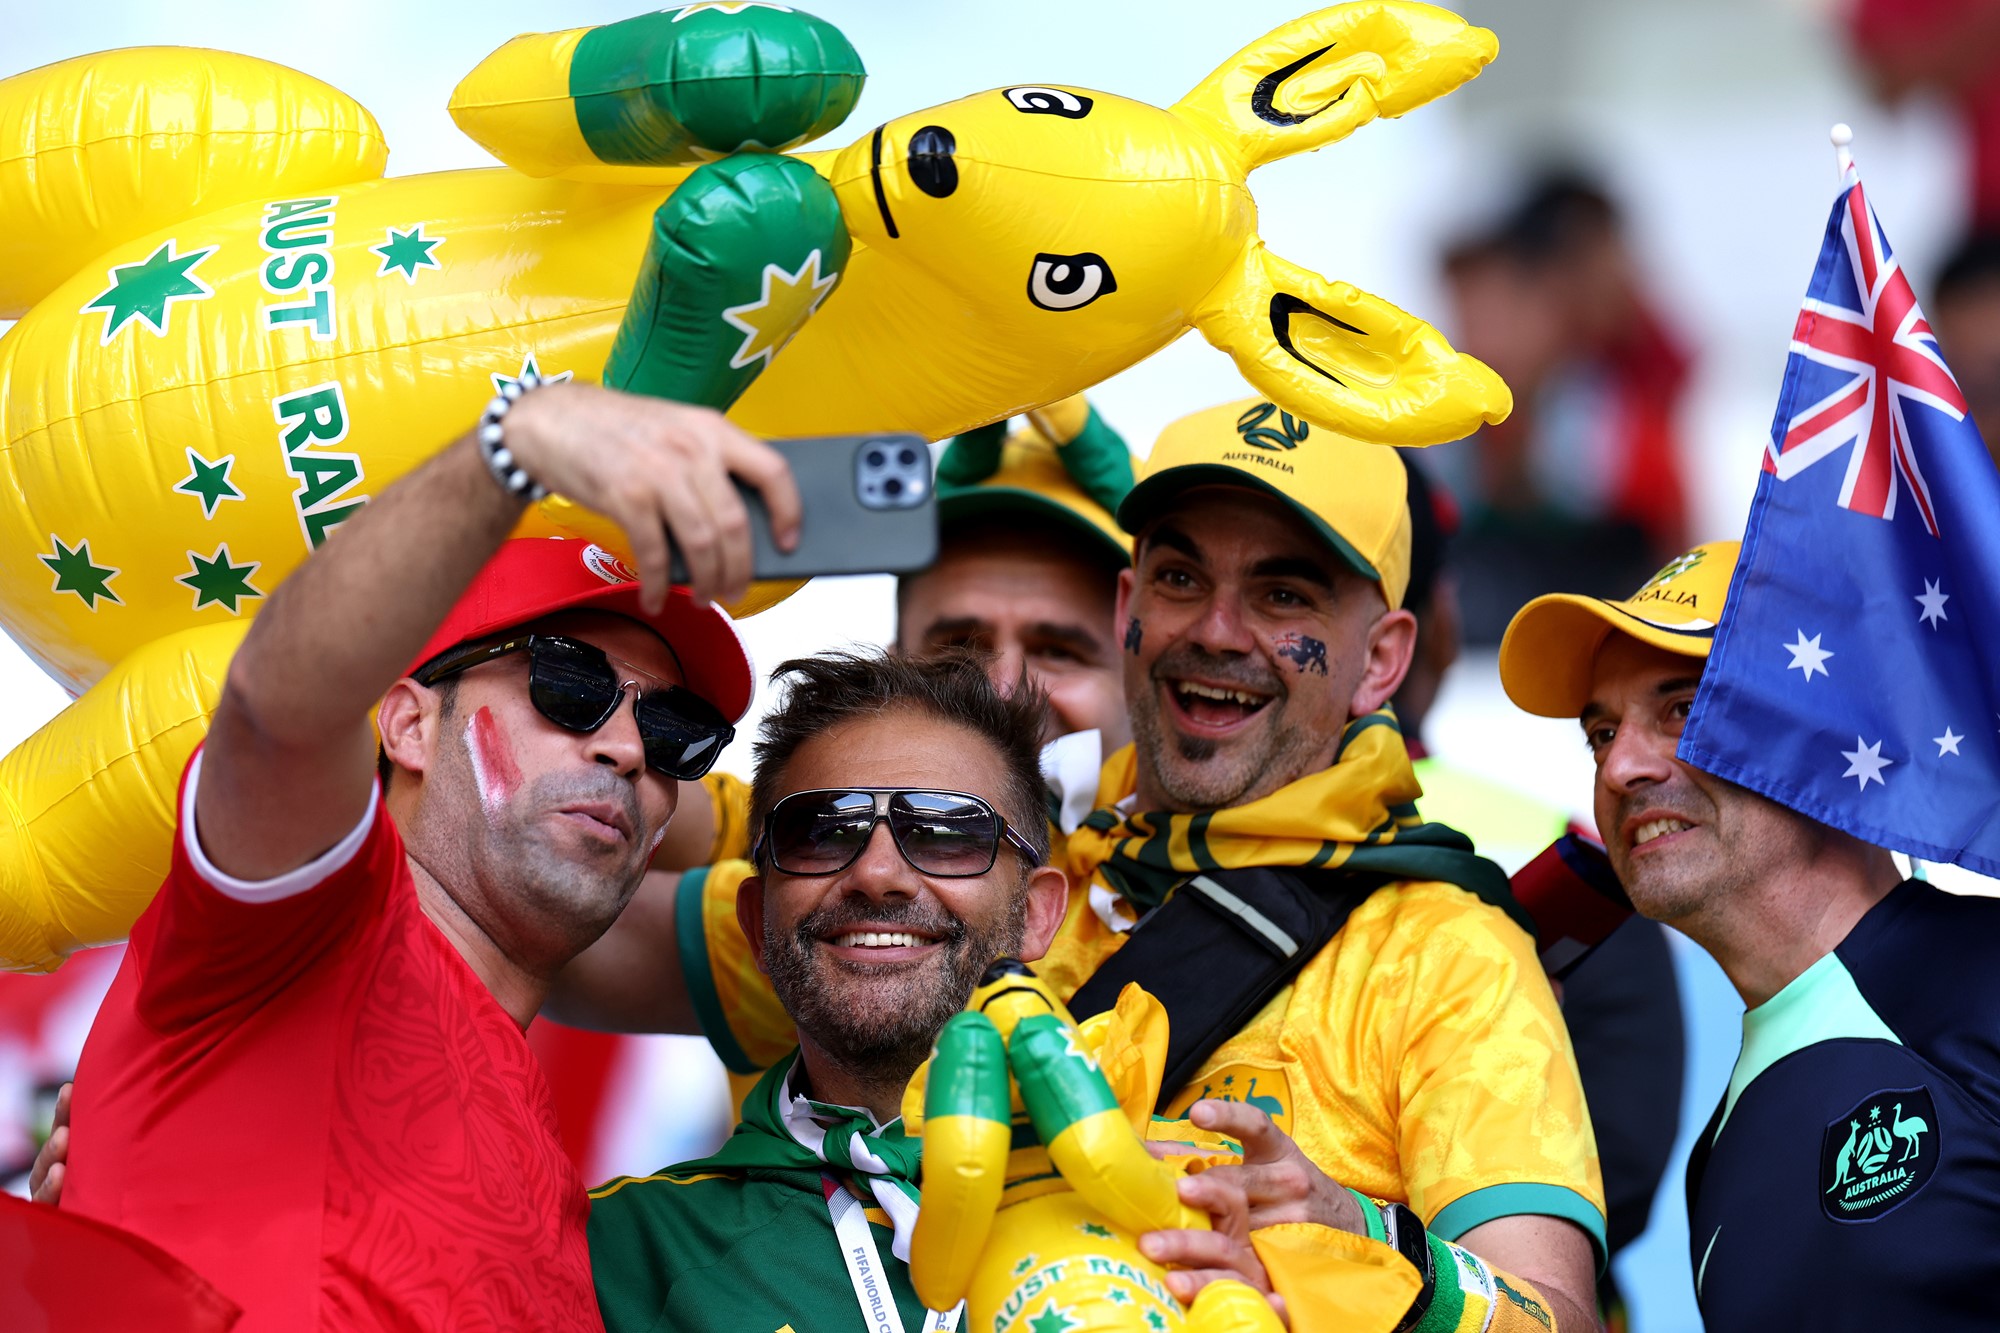 Socceroos fans mingle with Tunisia fans